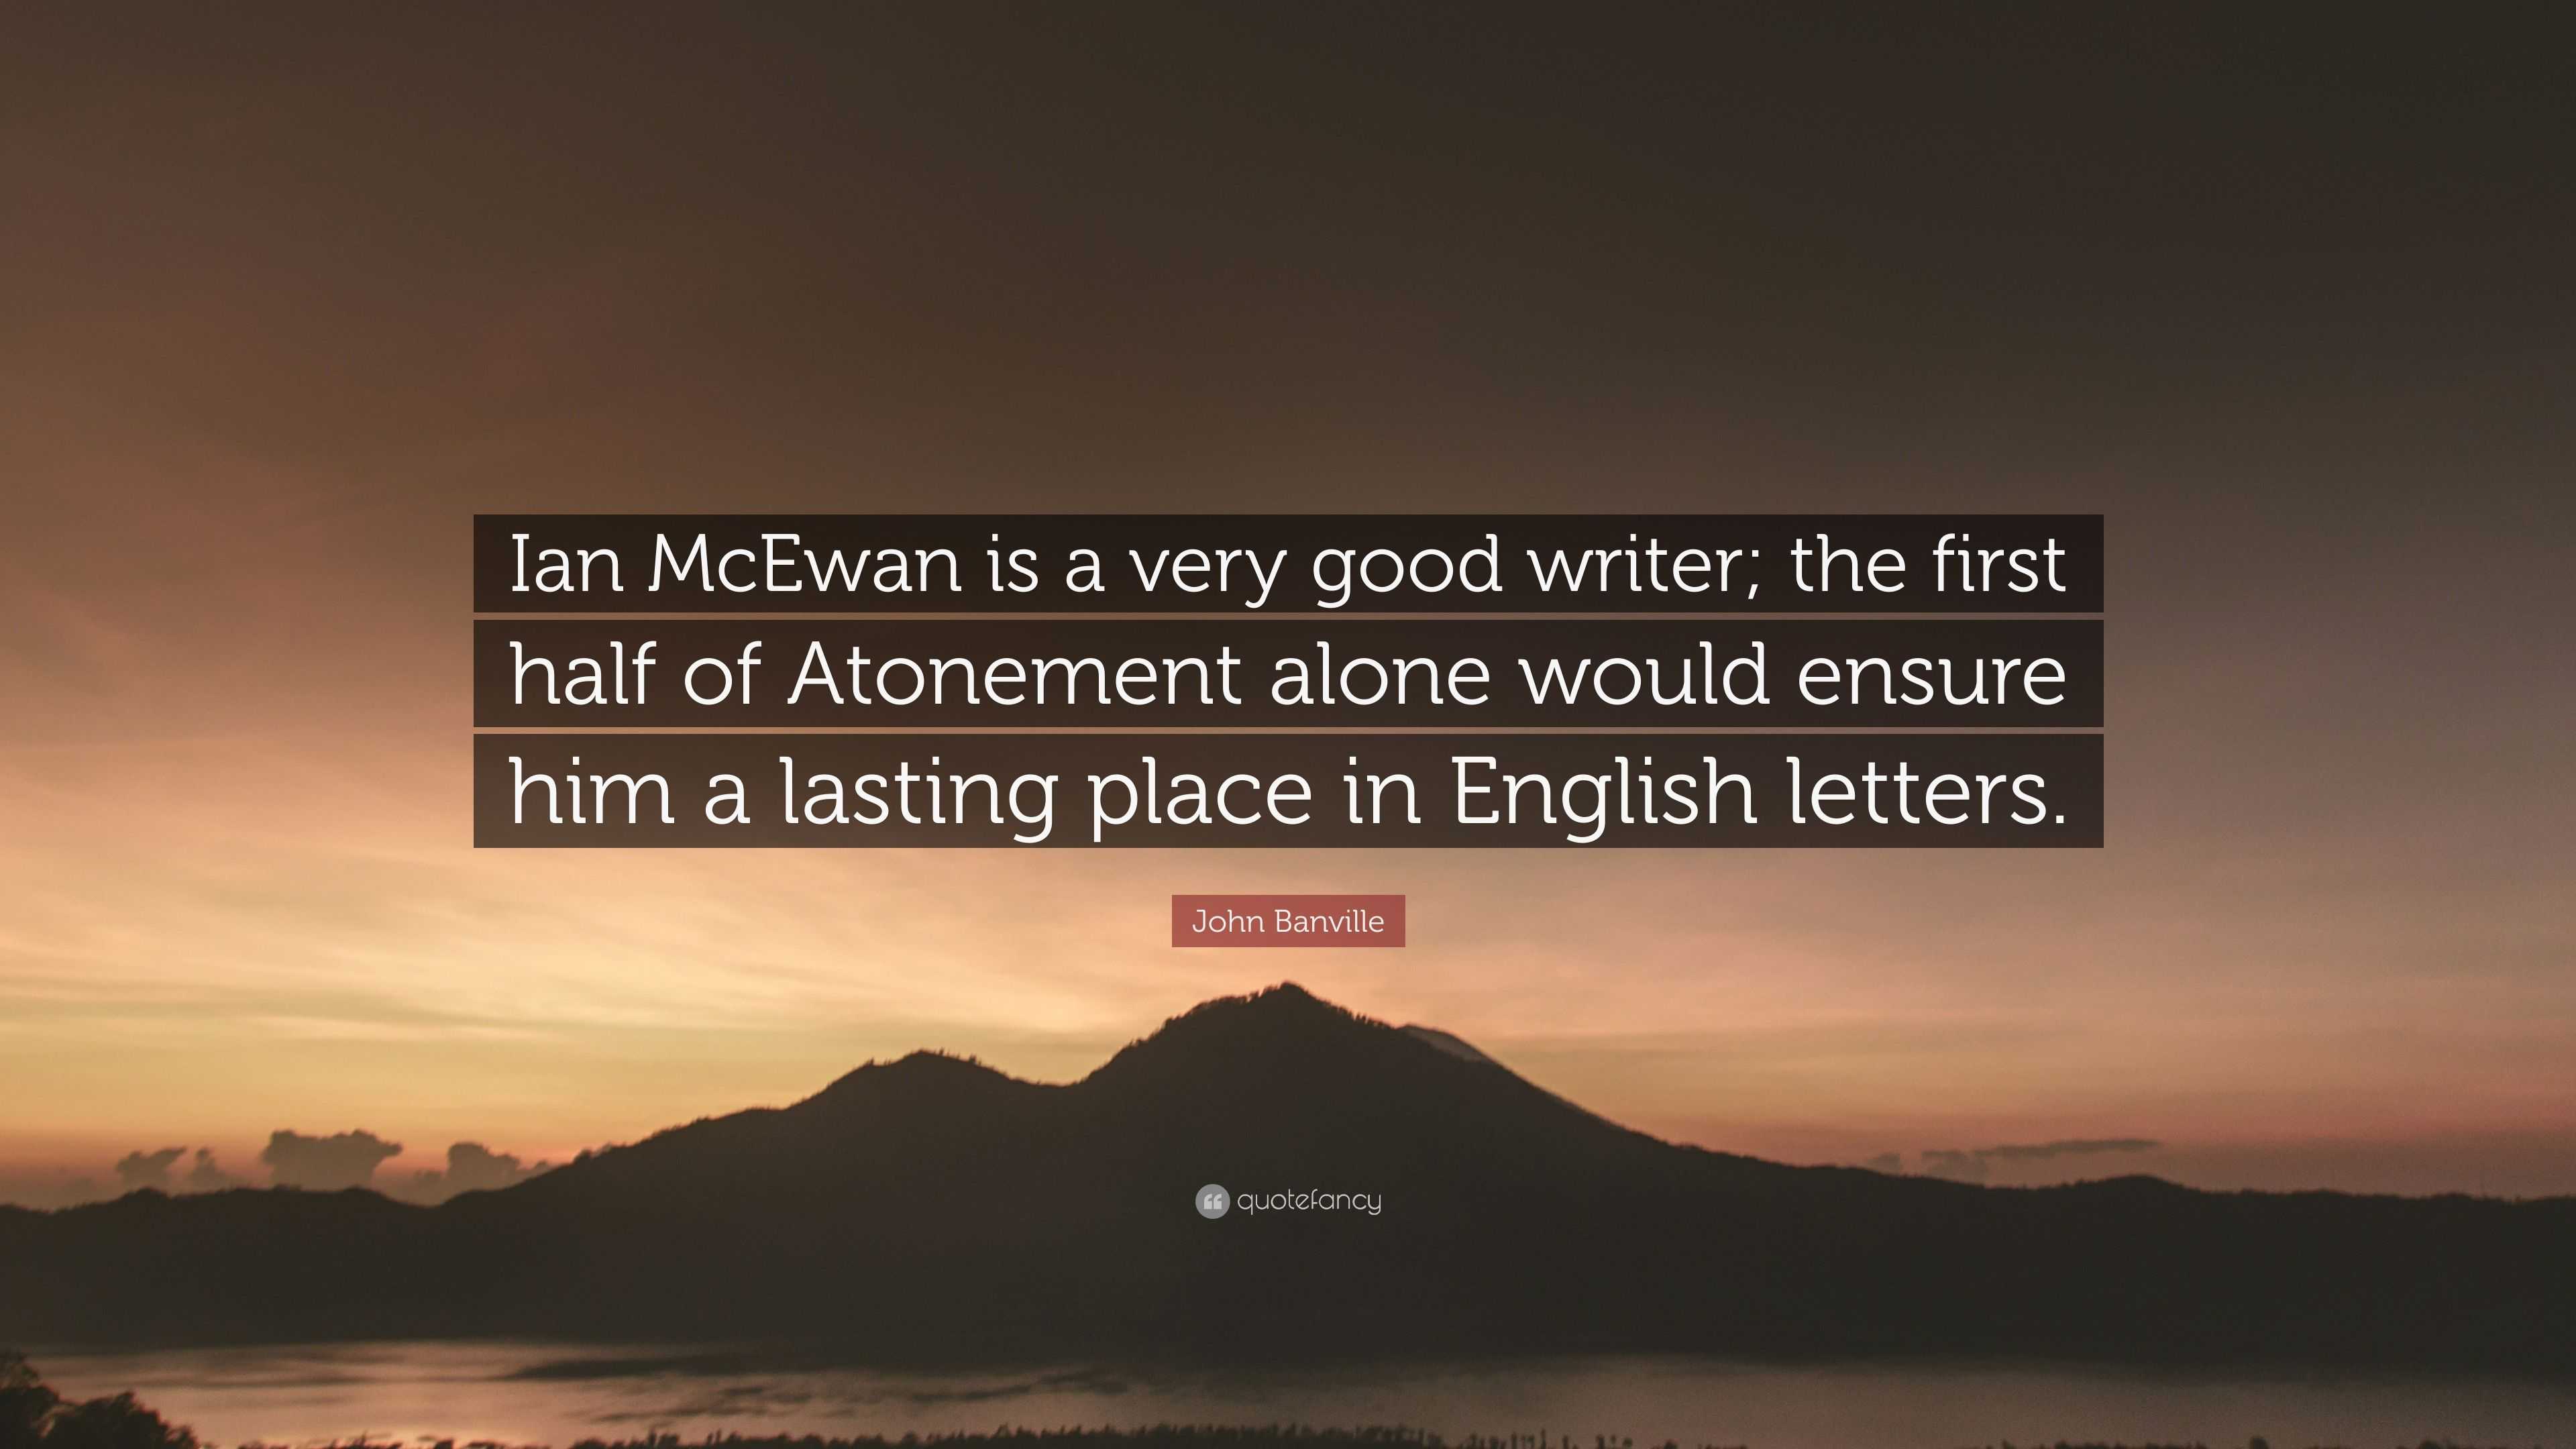 John Banville Quote: “Ian McEwan is a very good writer; the first half of  Atonement alone